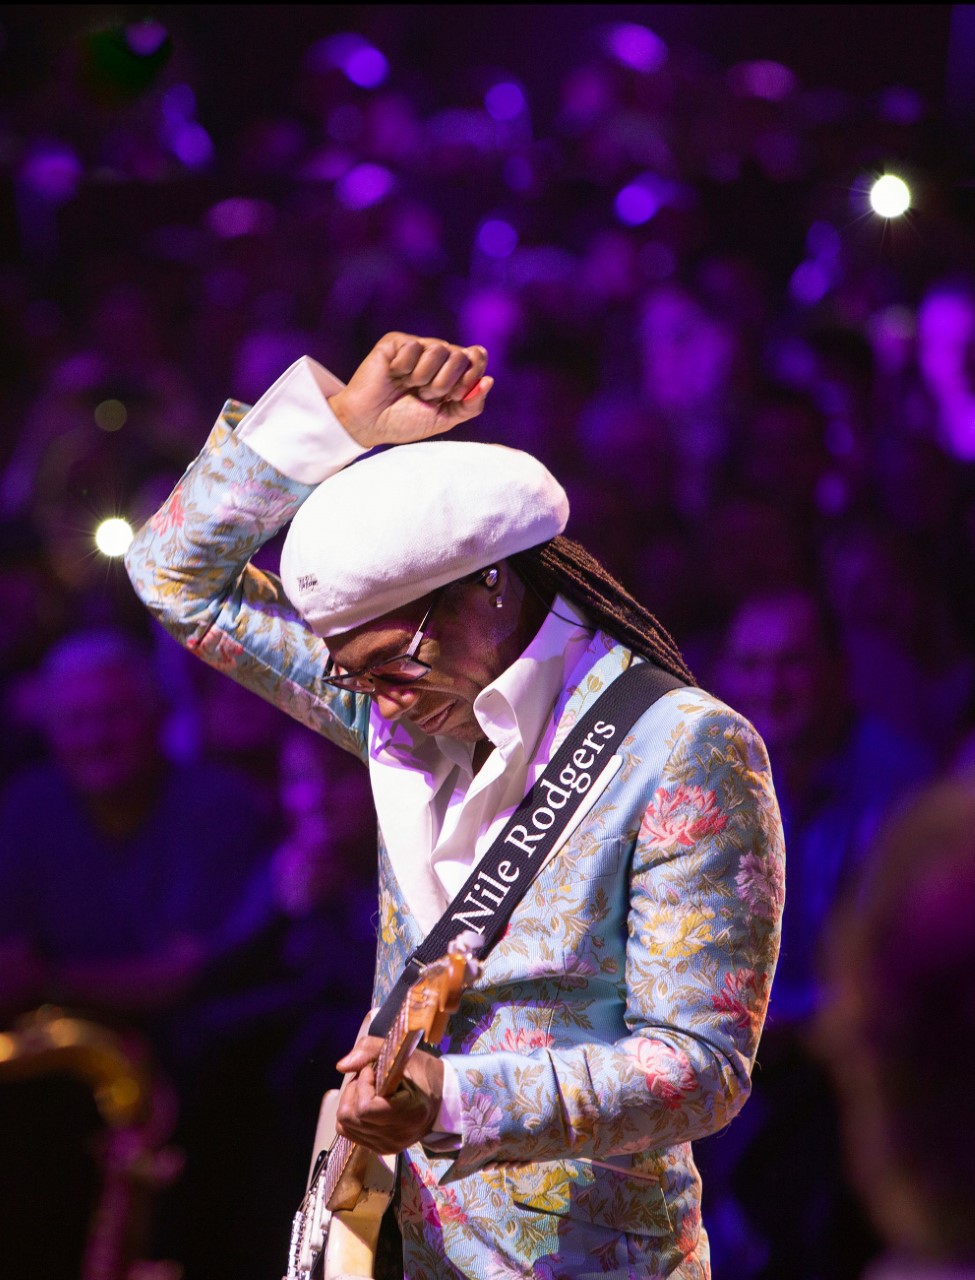 Nile Rodgers and CHIC and Belle & Sebastian confirmed to play Bristol’s Lloyds Amphitheatre in July 2022